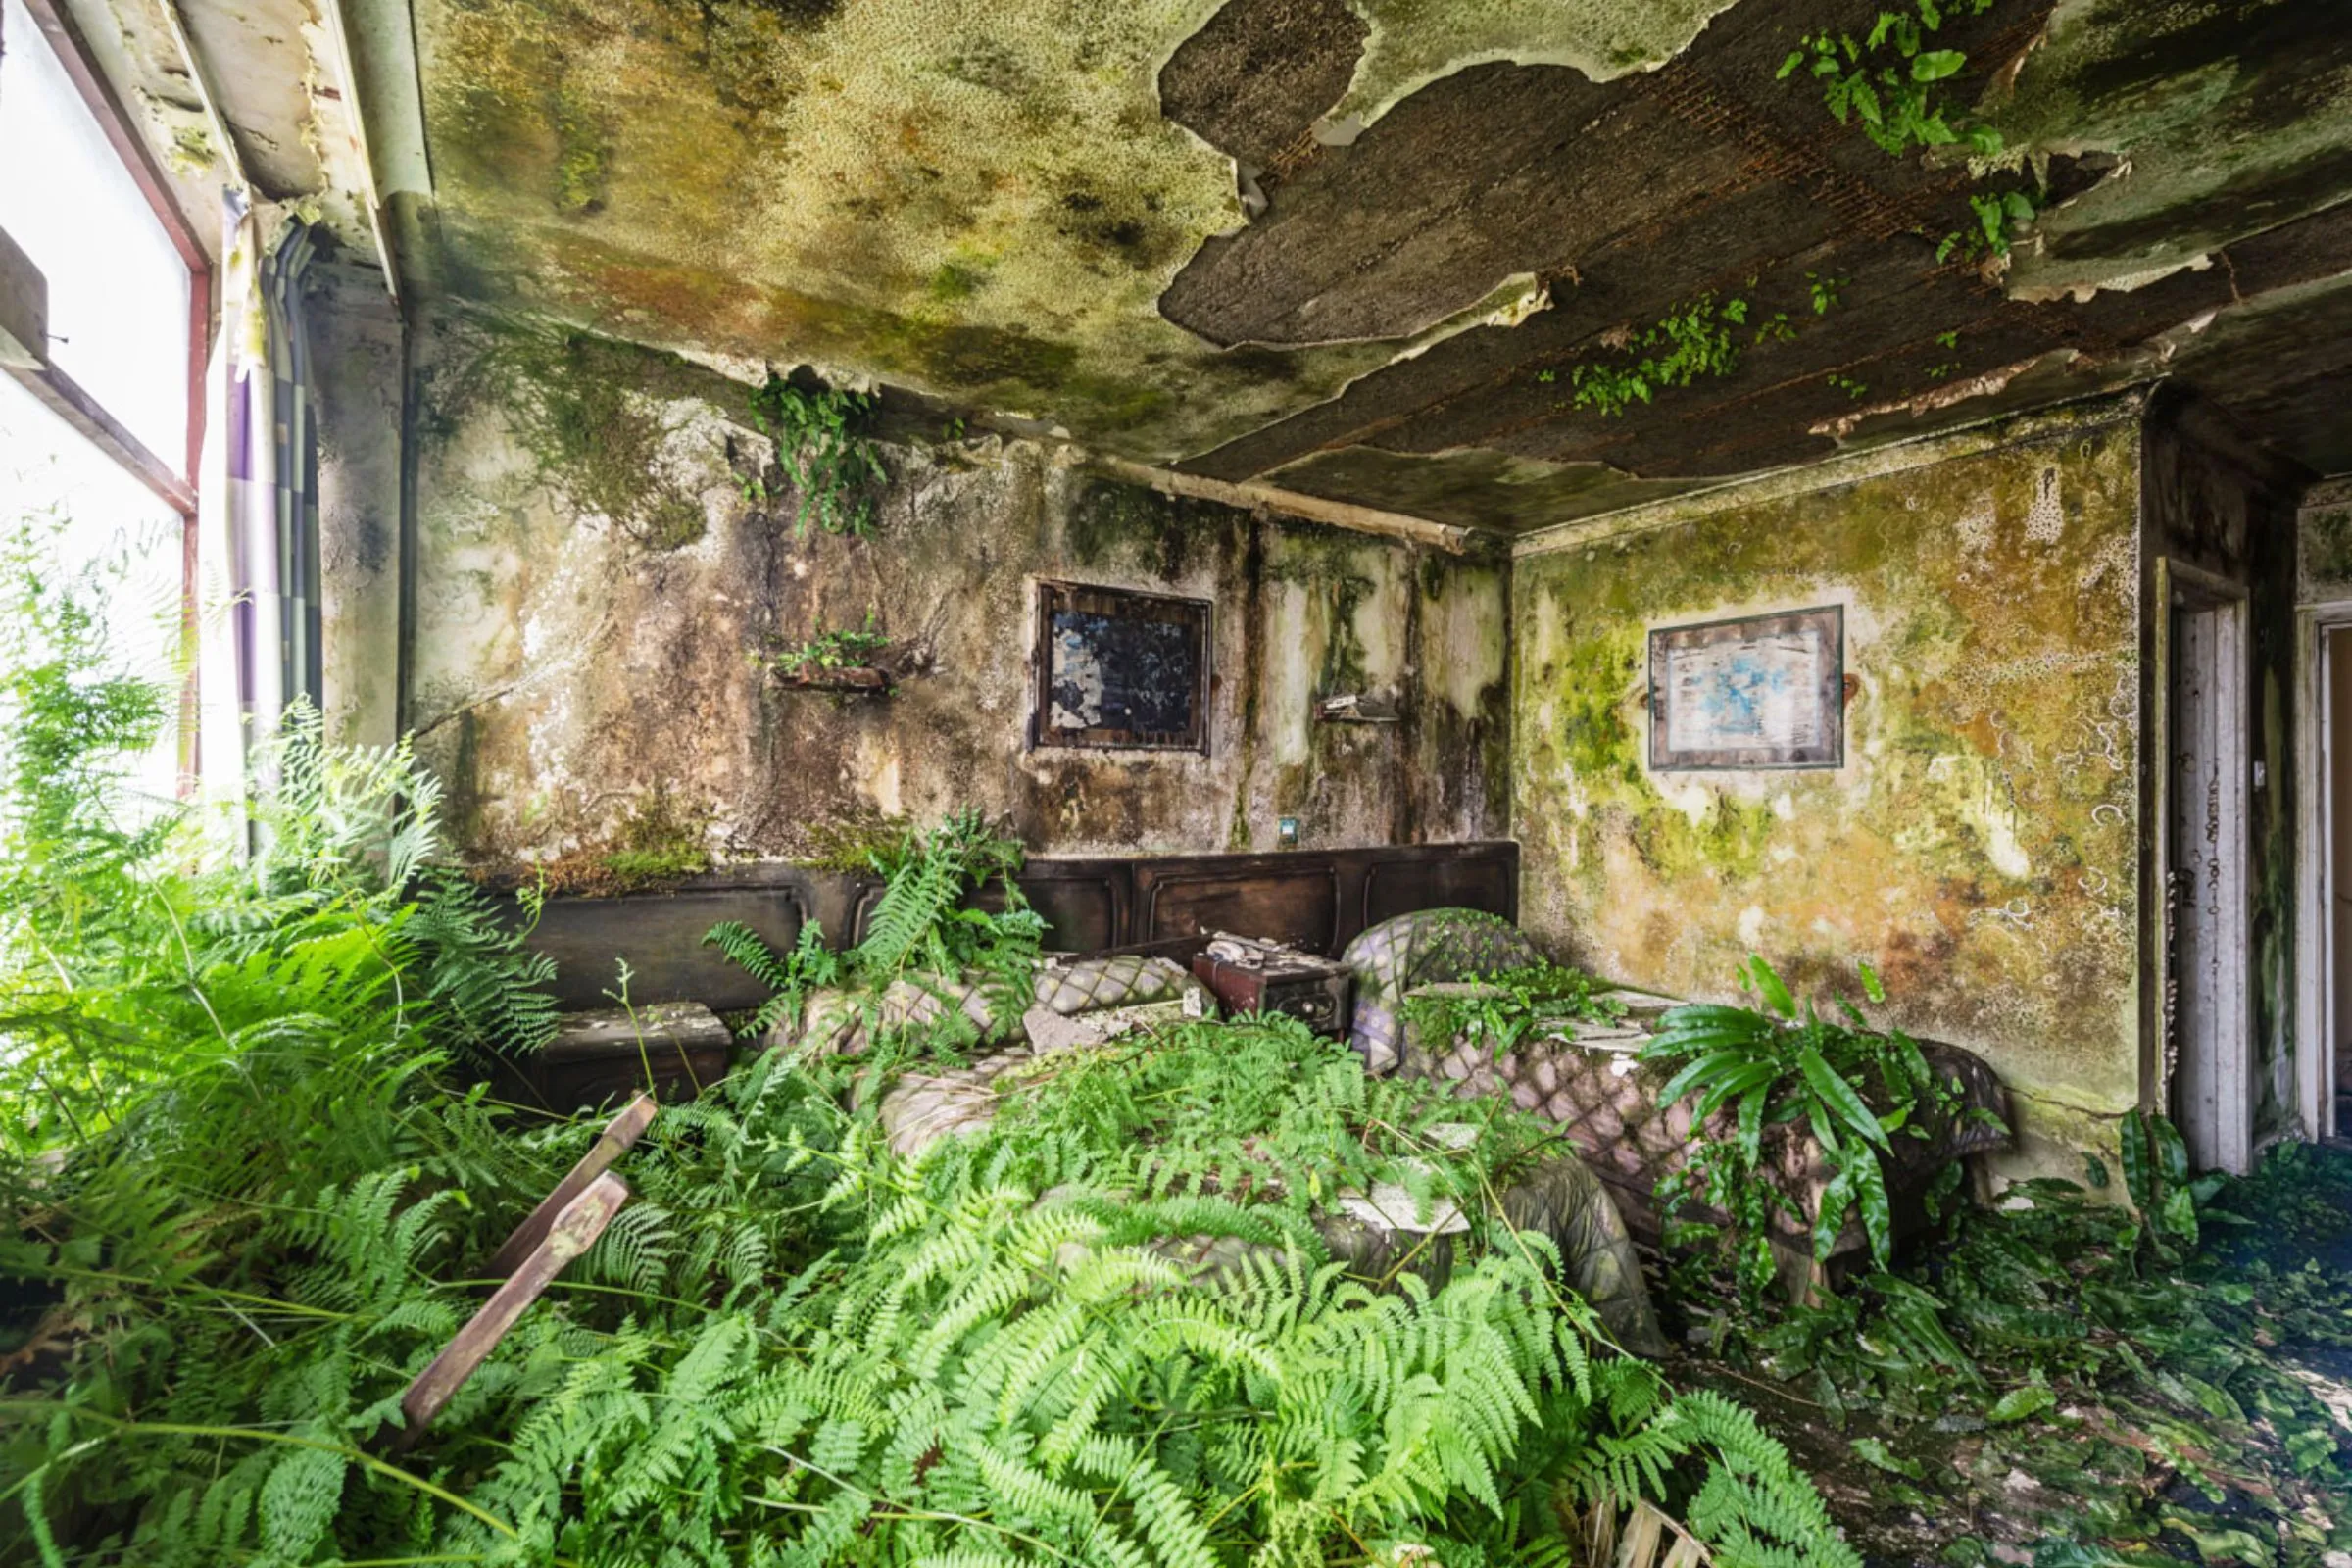 Plants in abandoned place